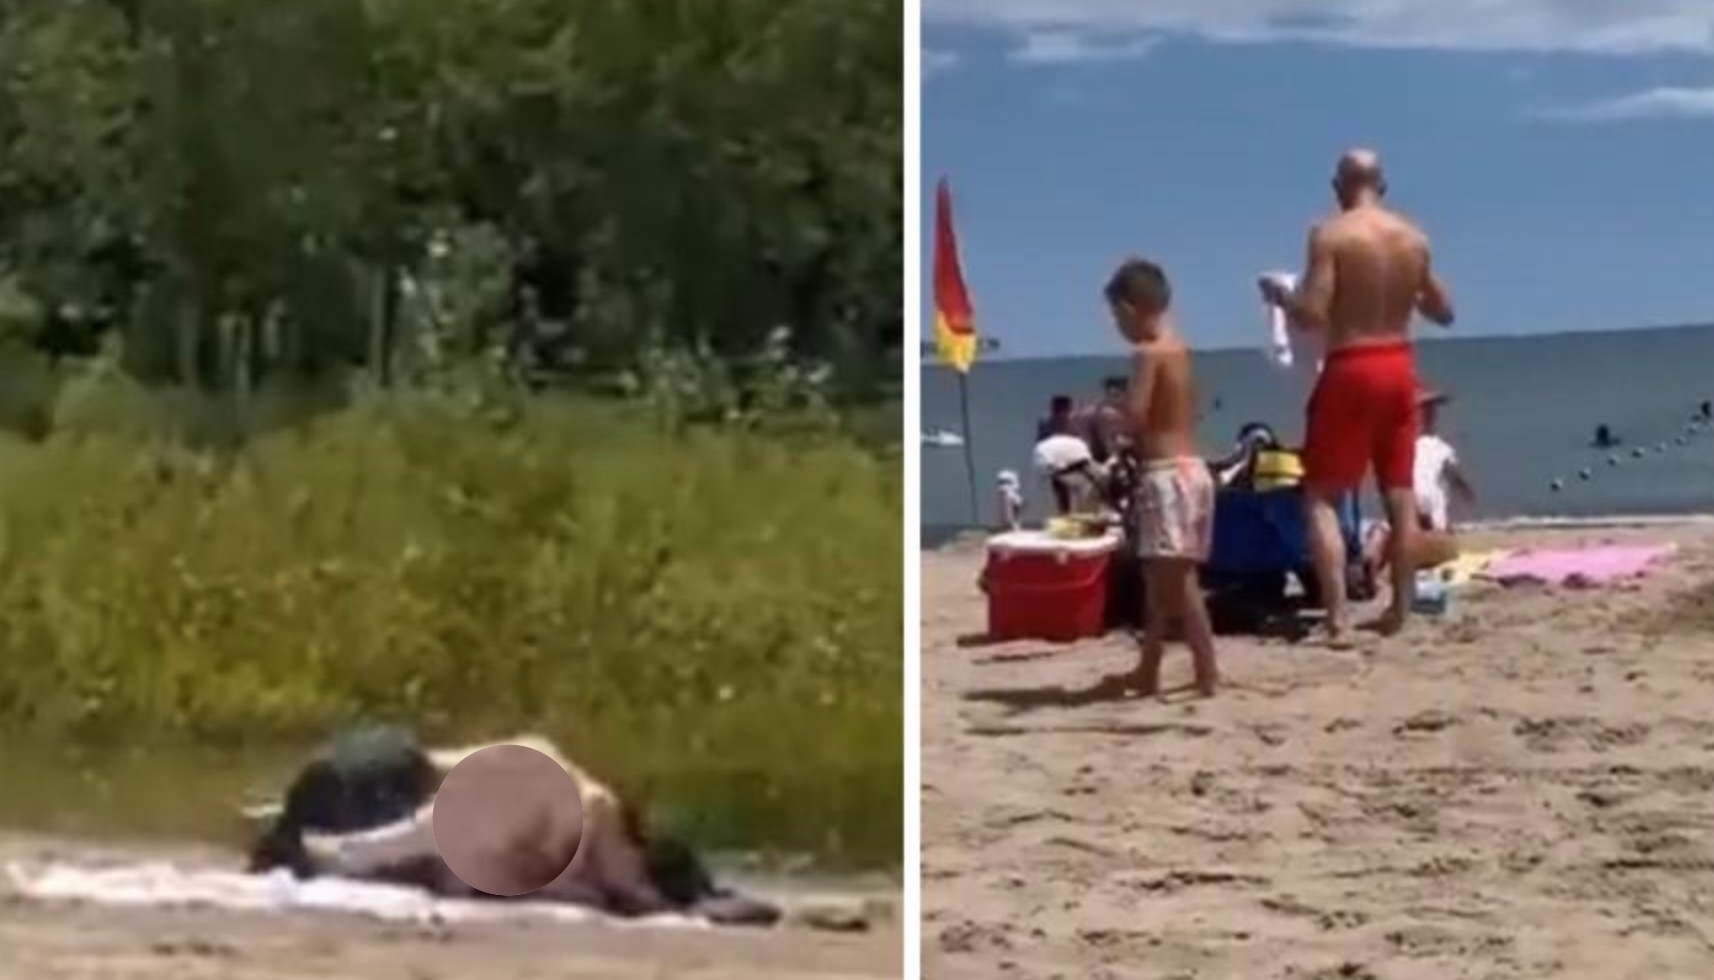 BRAZEN Couple Have Sex on the Beach While Baby and Kids Are Around - Watch Video pic pic